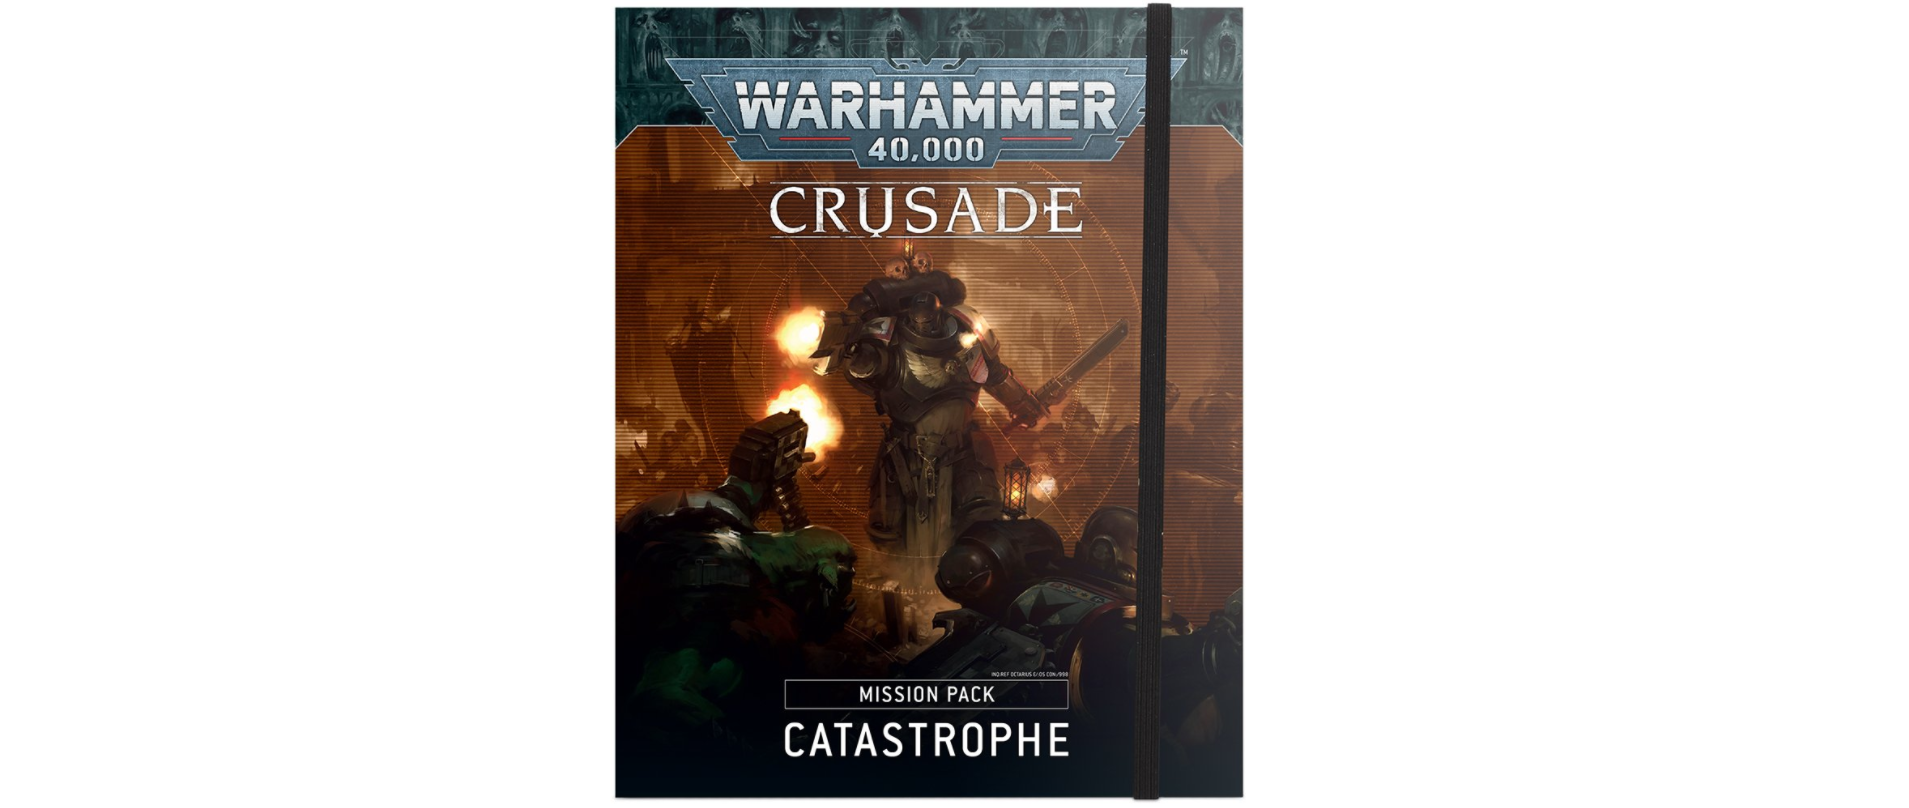 is thier an order to all of the warhammer books